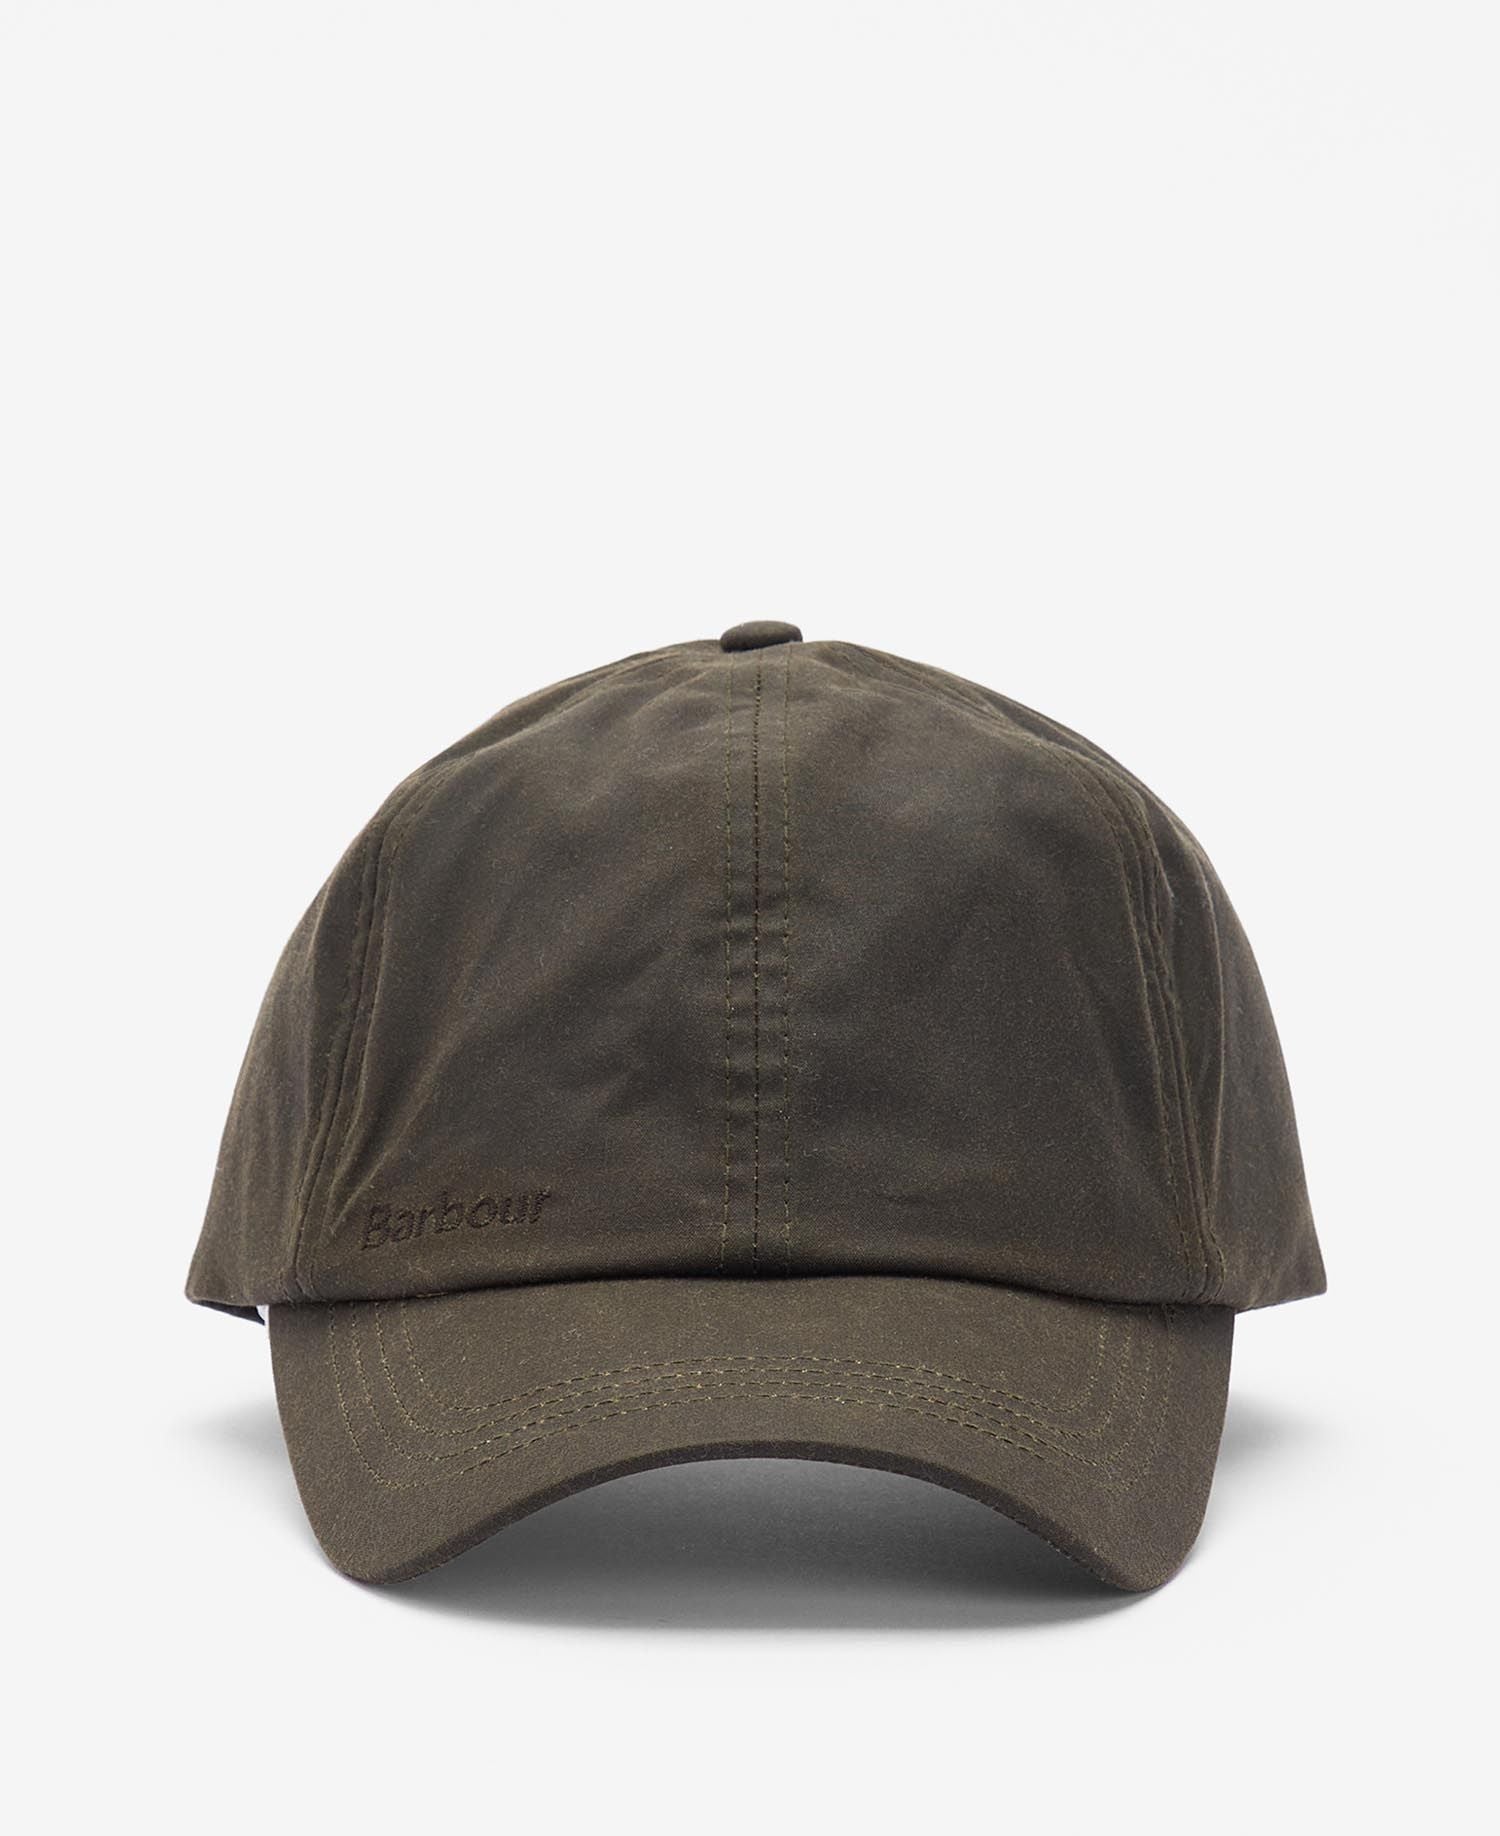 Barbour -  Wax Sports Cap, Olive